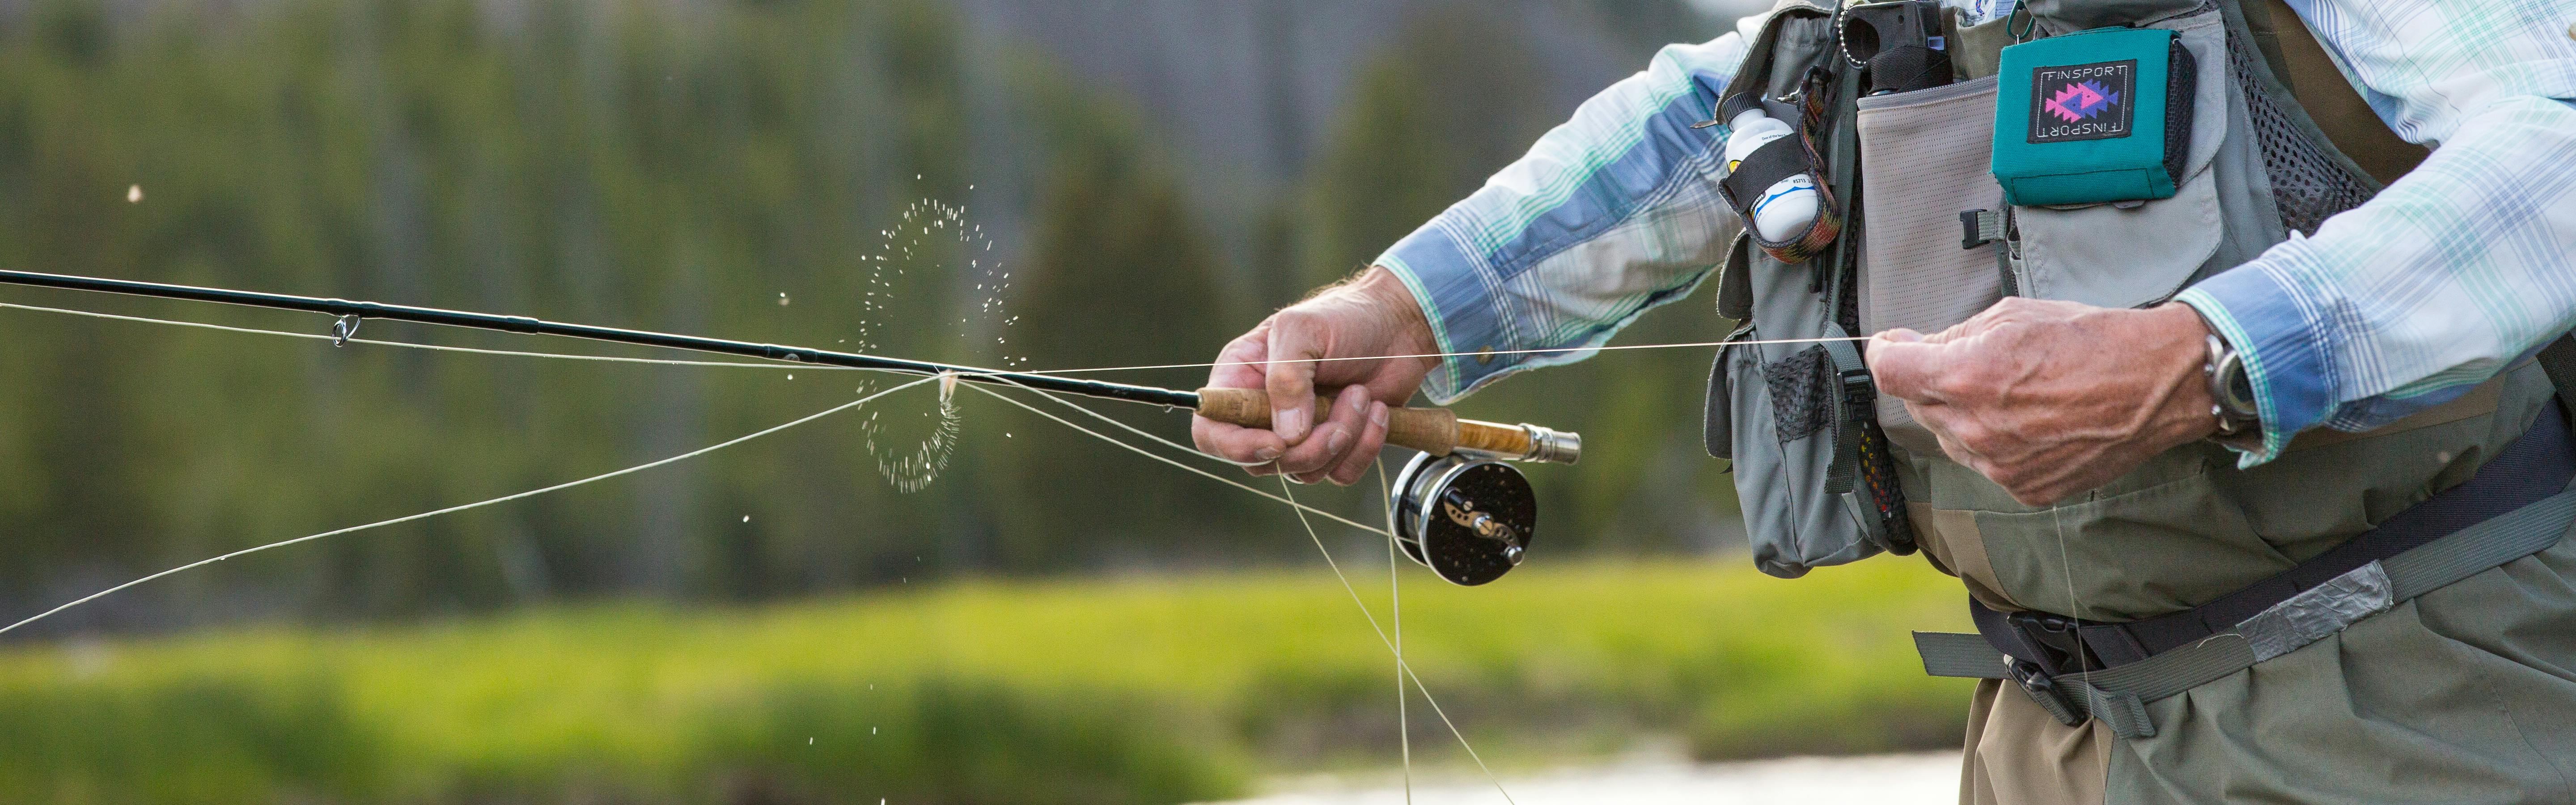 How Much Should Your Fly Fishing Gear Cost?